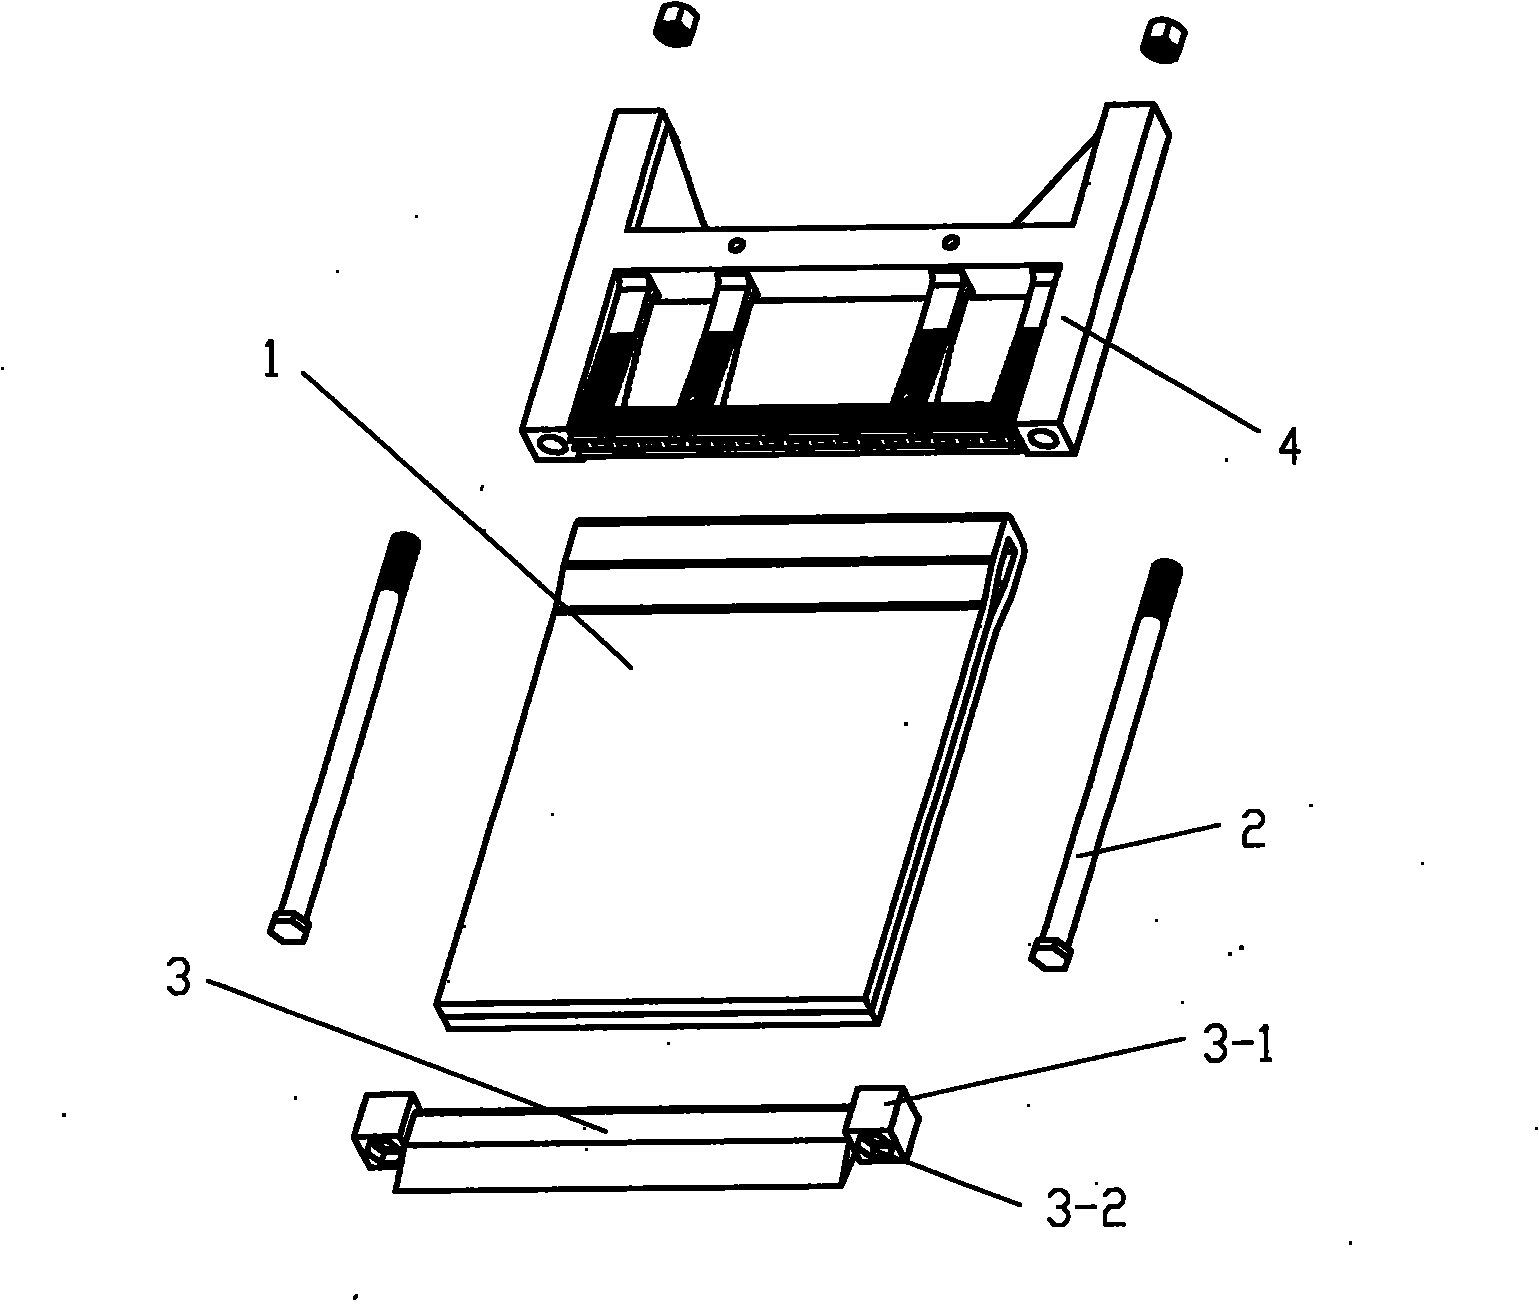 Strip mop with mechanical wiping device